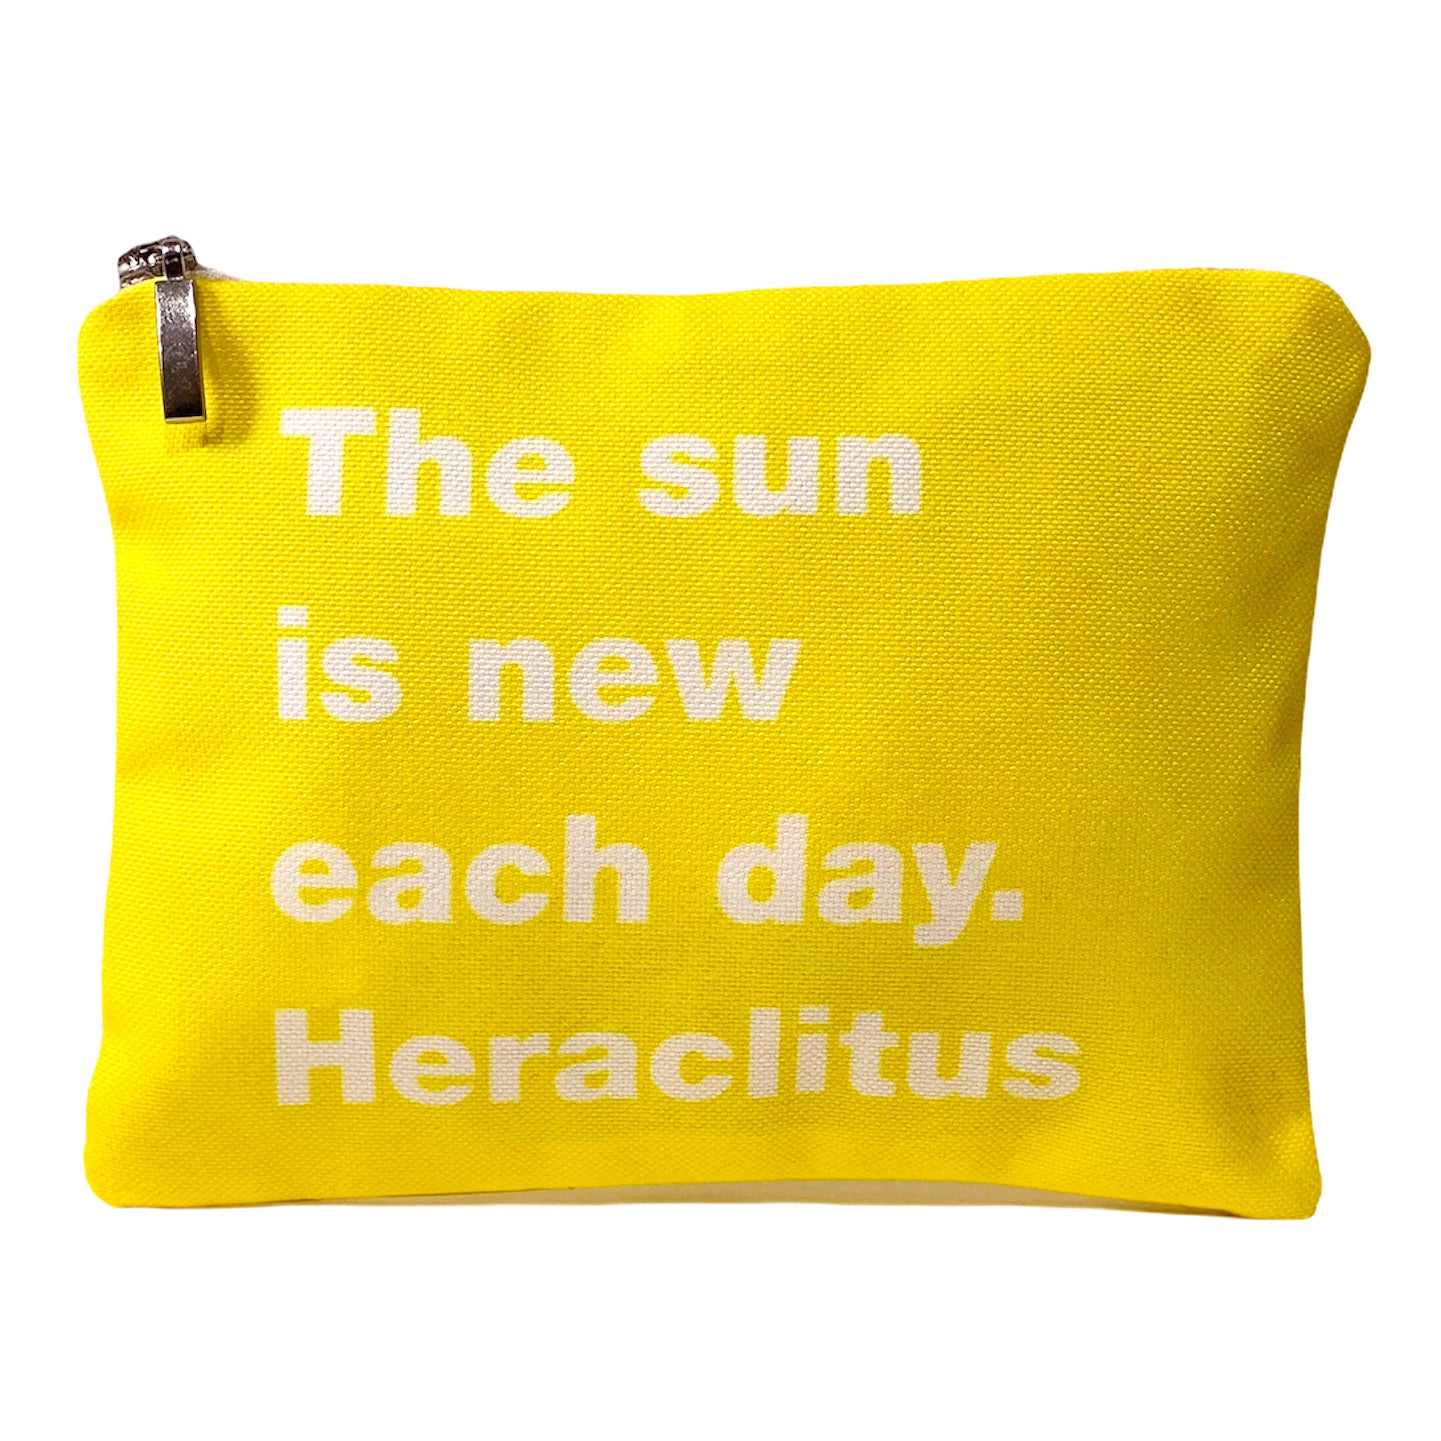 The sun is new each day. Heraclitus Thiki bag